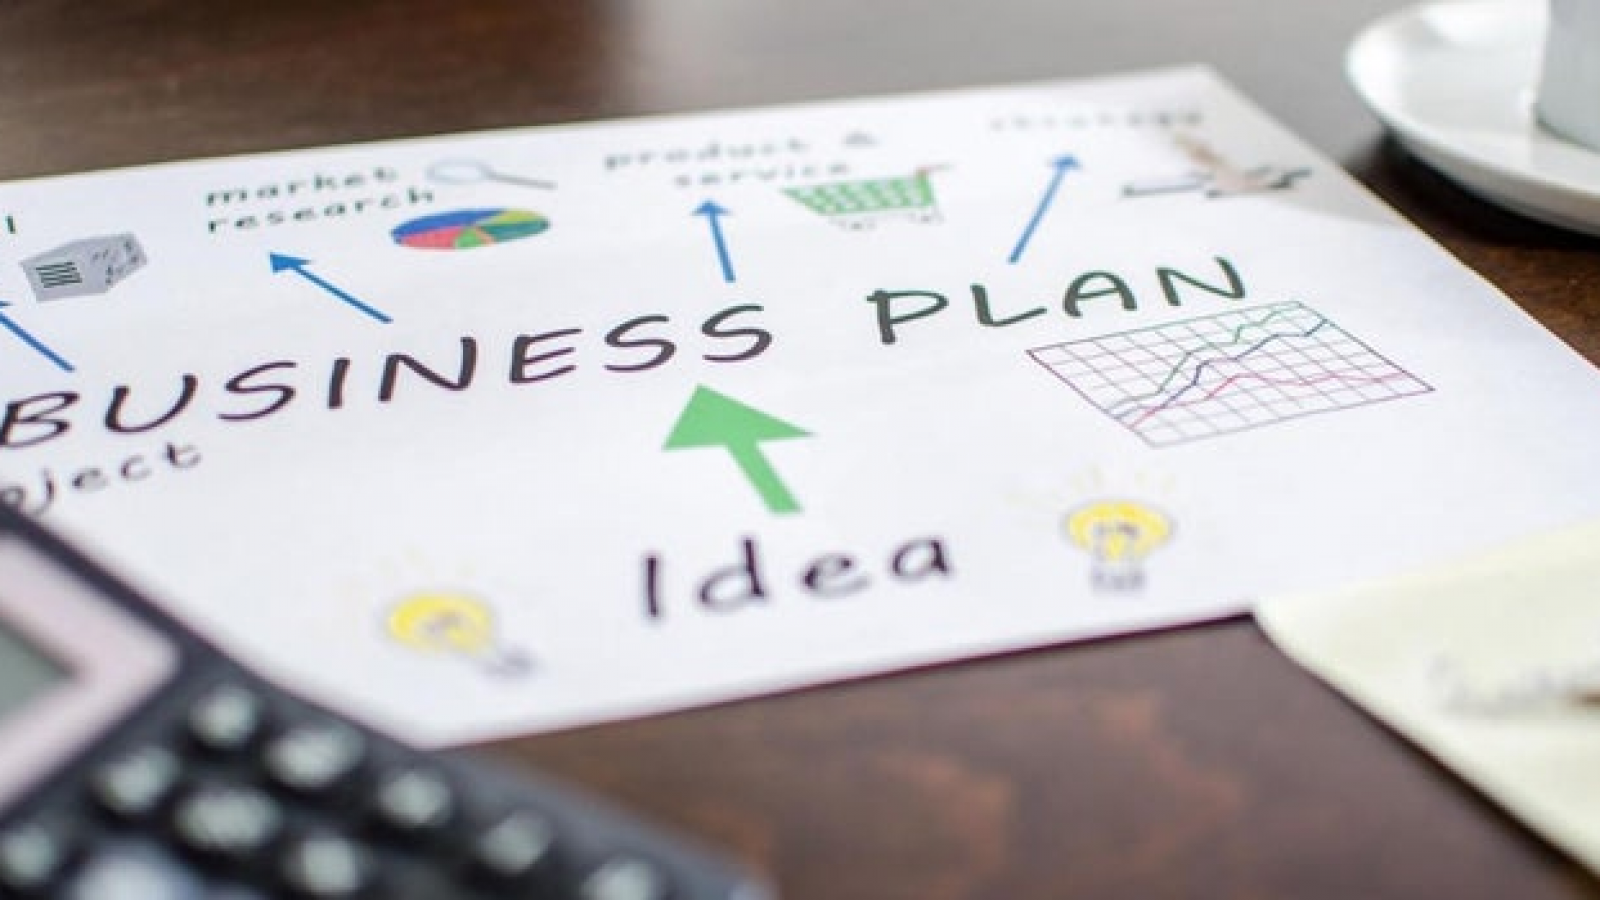 How to Write a Great Business Plan2